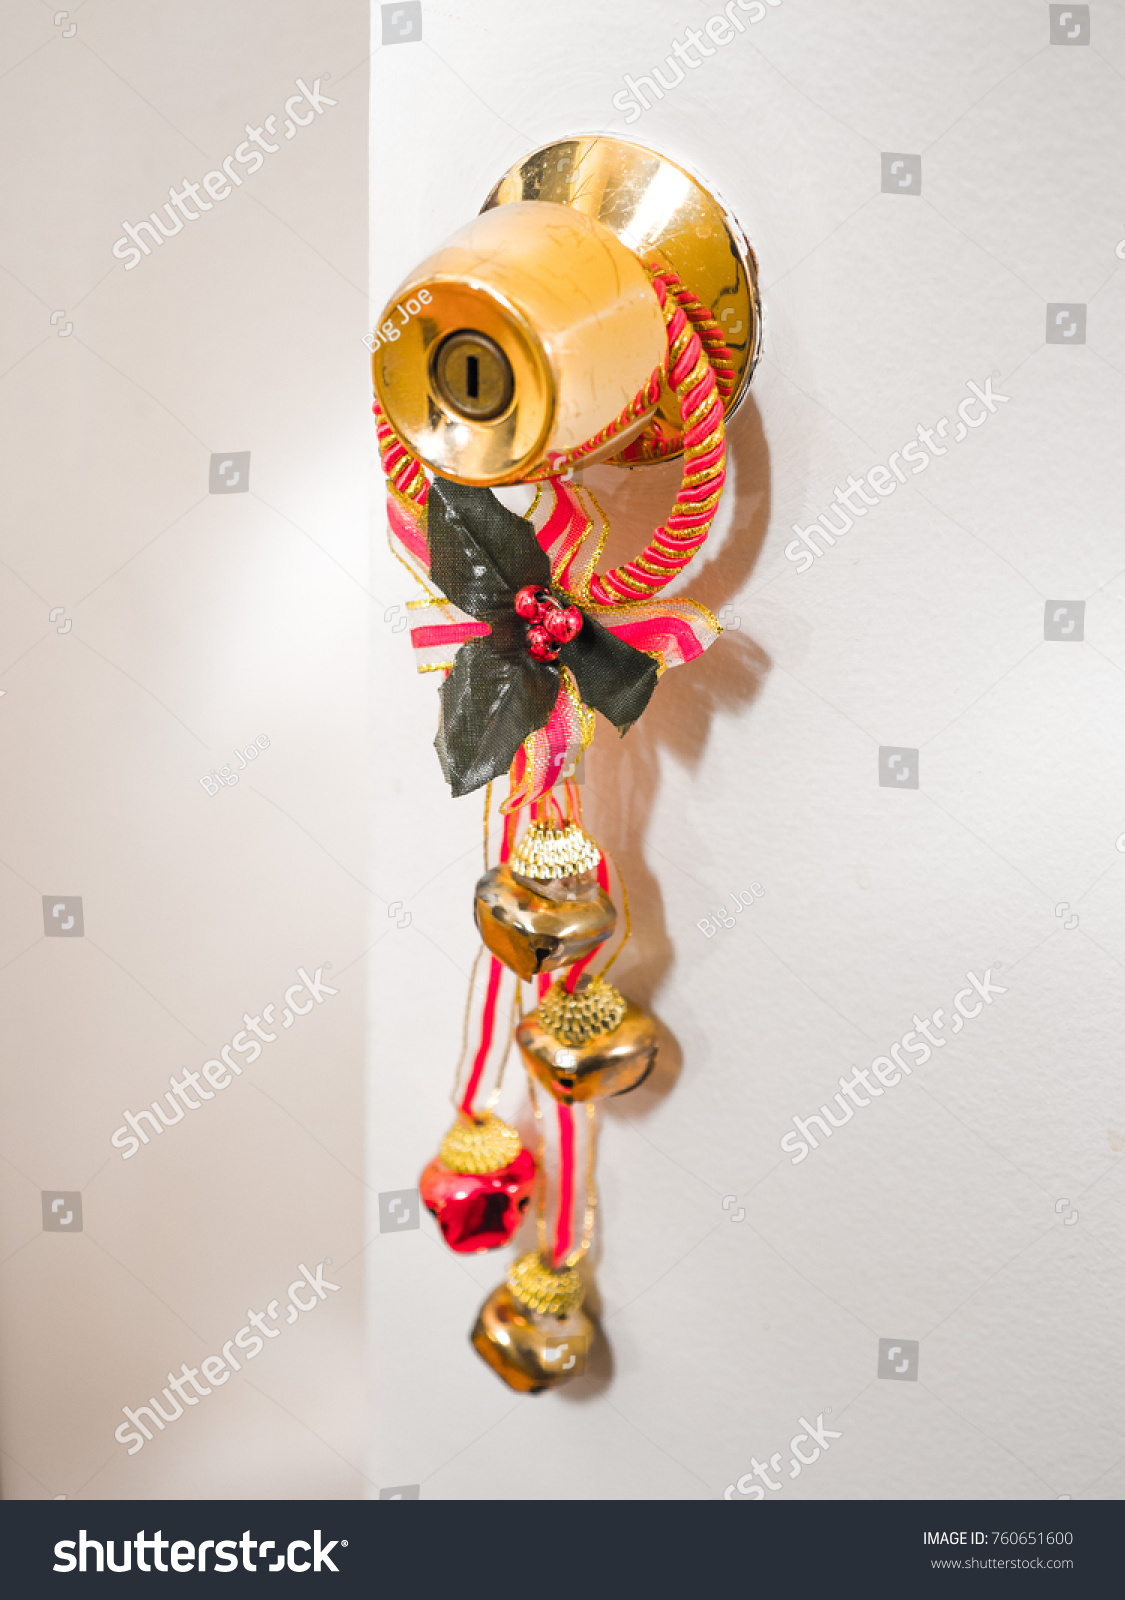 Close-up photograph of red and gold colored Christmas bells hanging on a polished brass colored door knob for festive holiday background image. #760651600